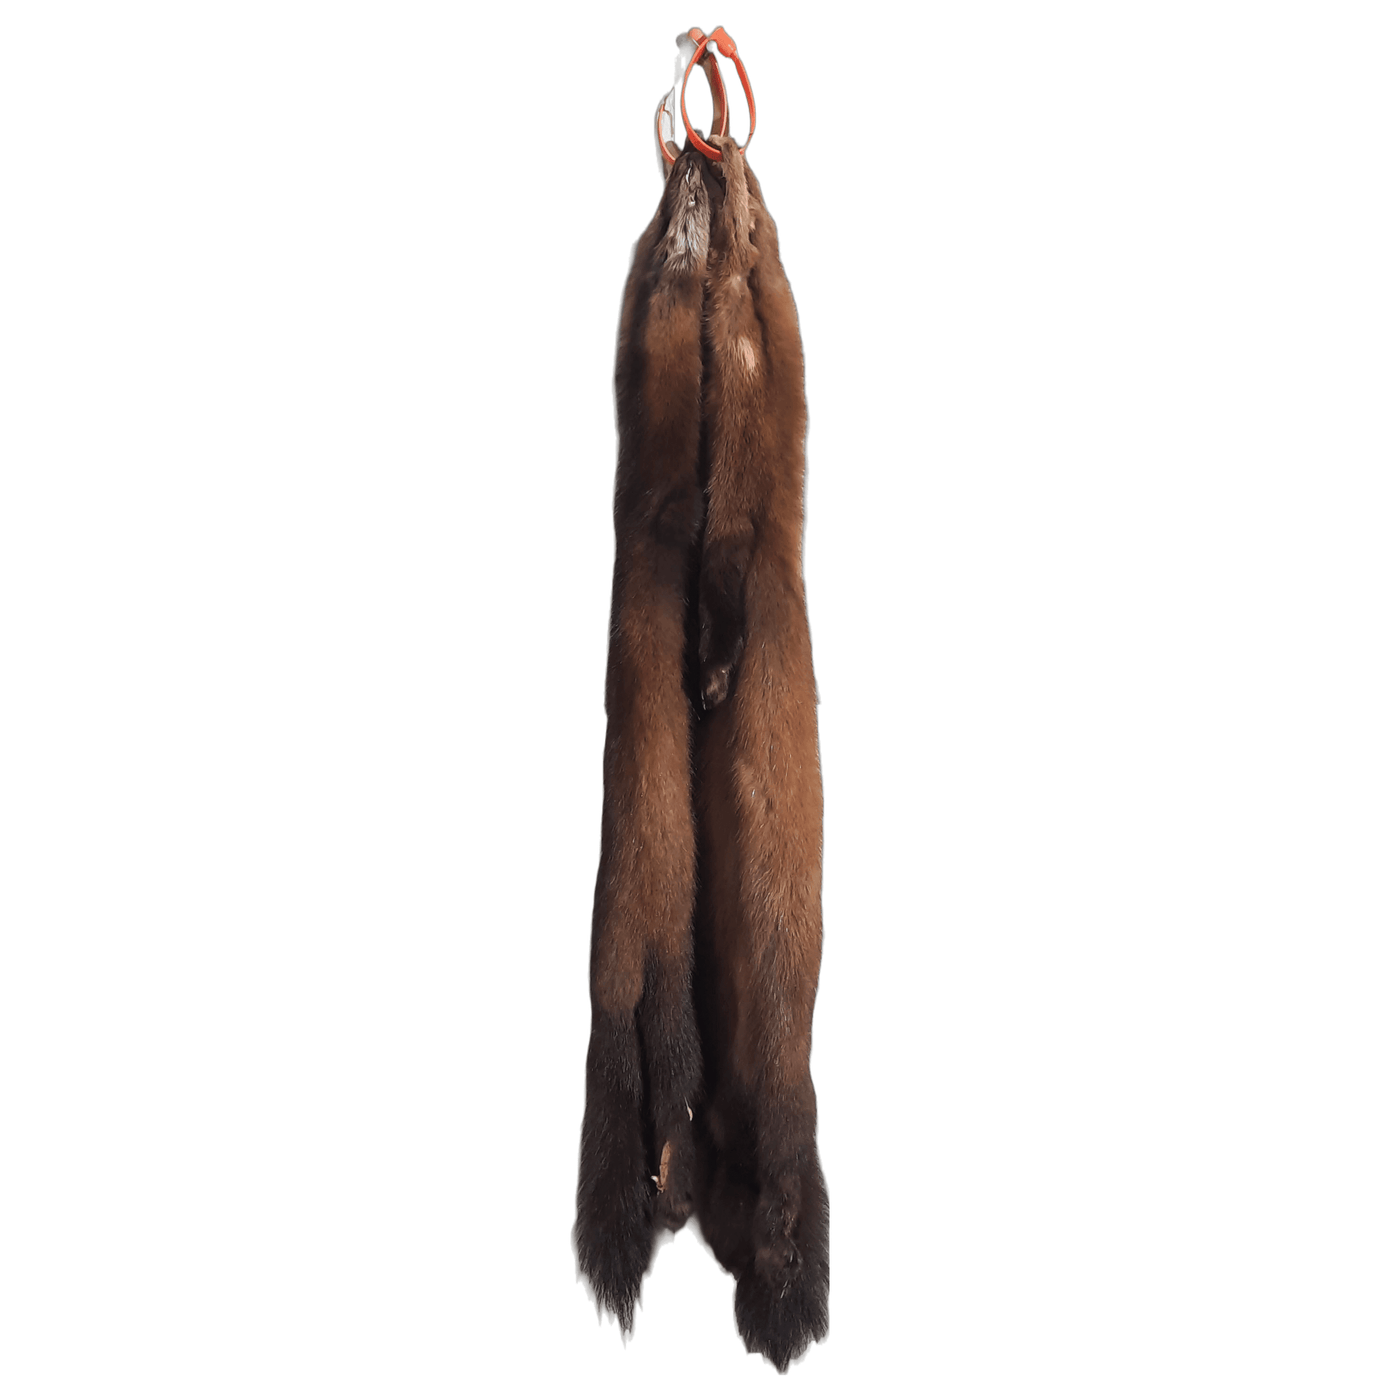 Tanned Marten Pelt - Trapping Supplies